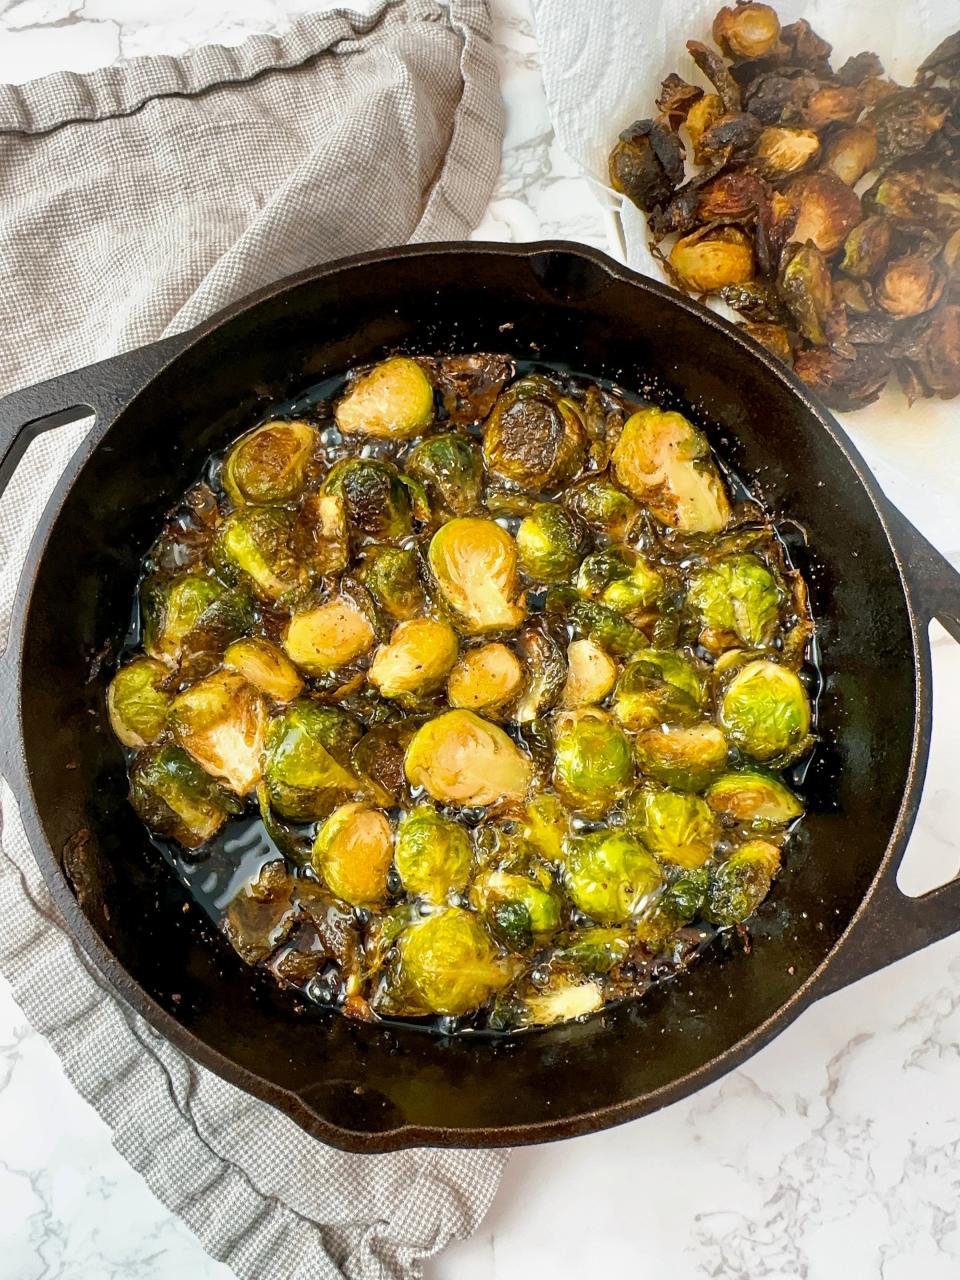 After oven roasting, crisp up your brussels sprouts on the stovetop.